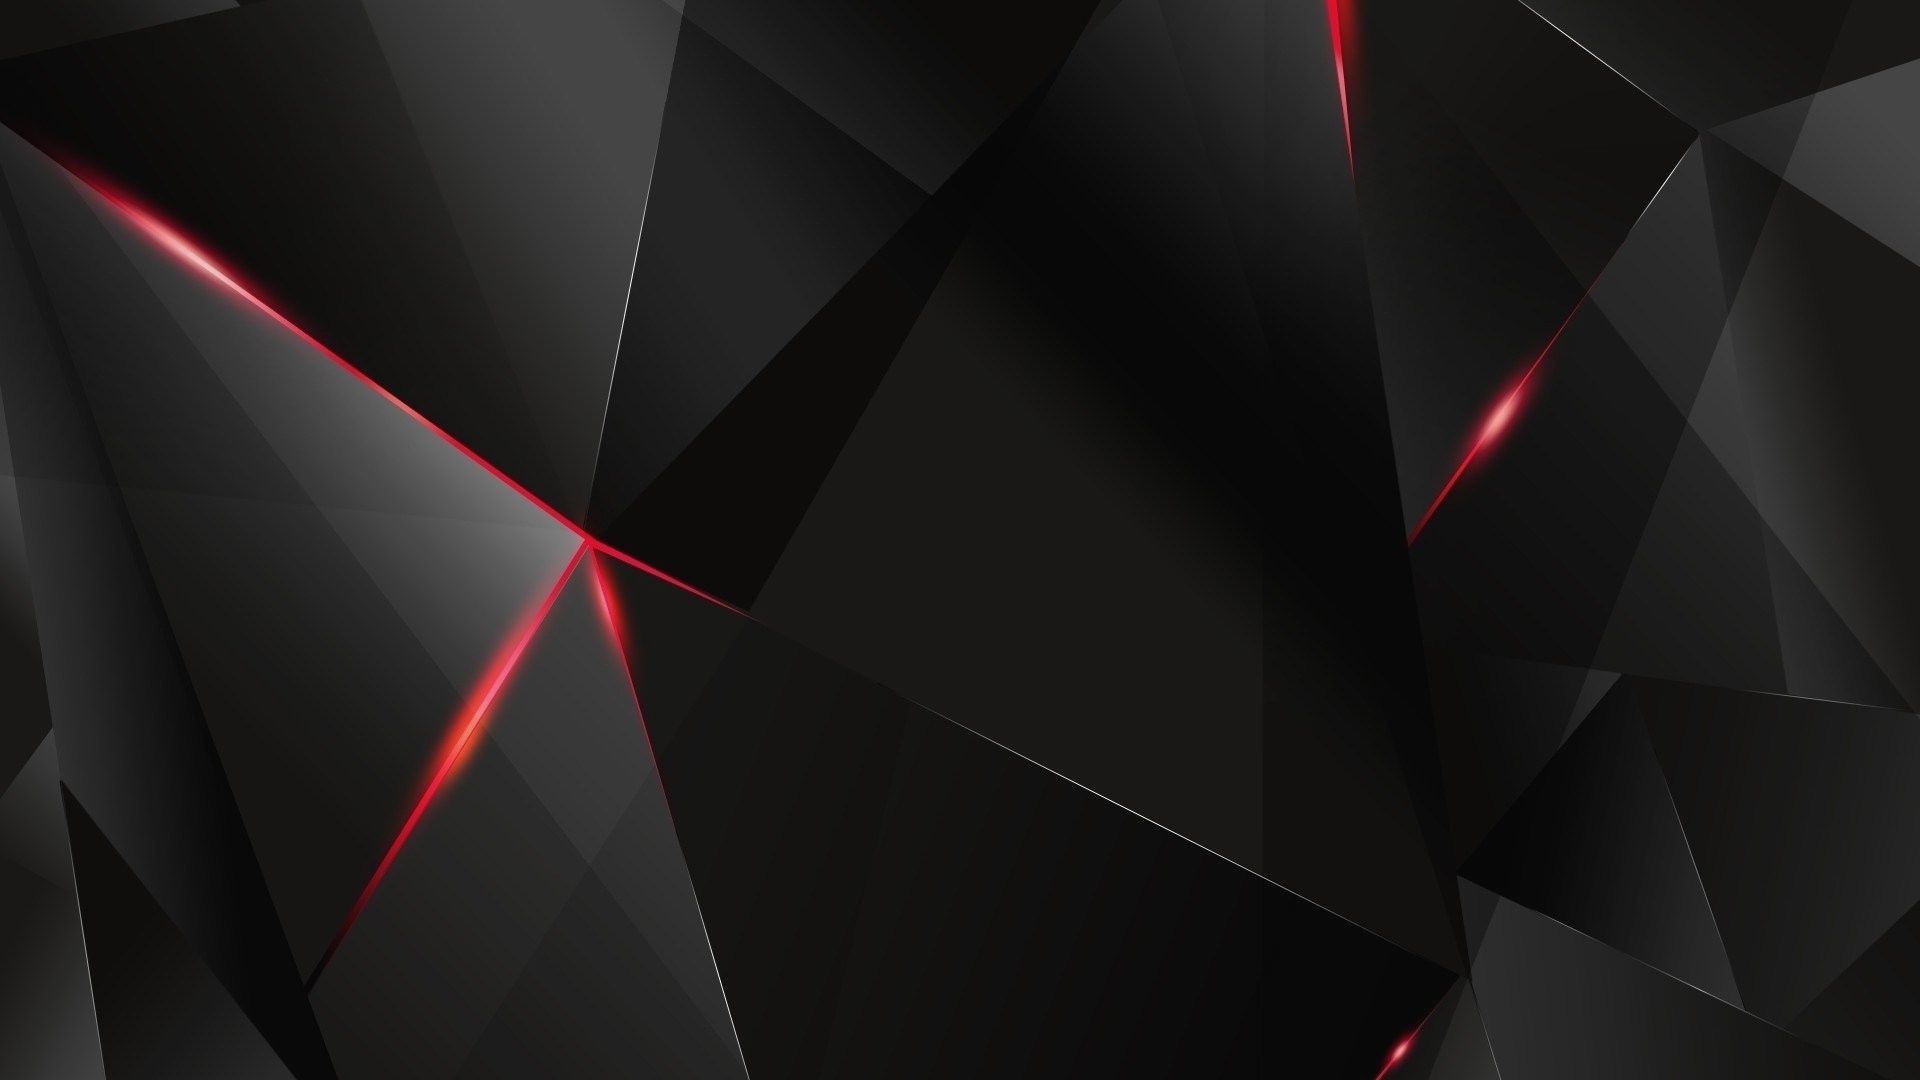 Black Wallpapers Wth Red 3d Effect